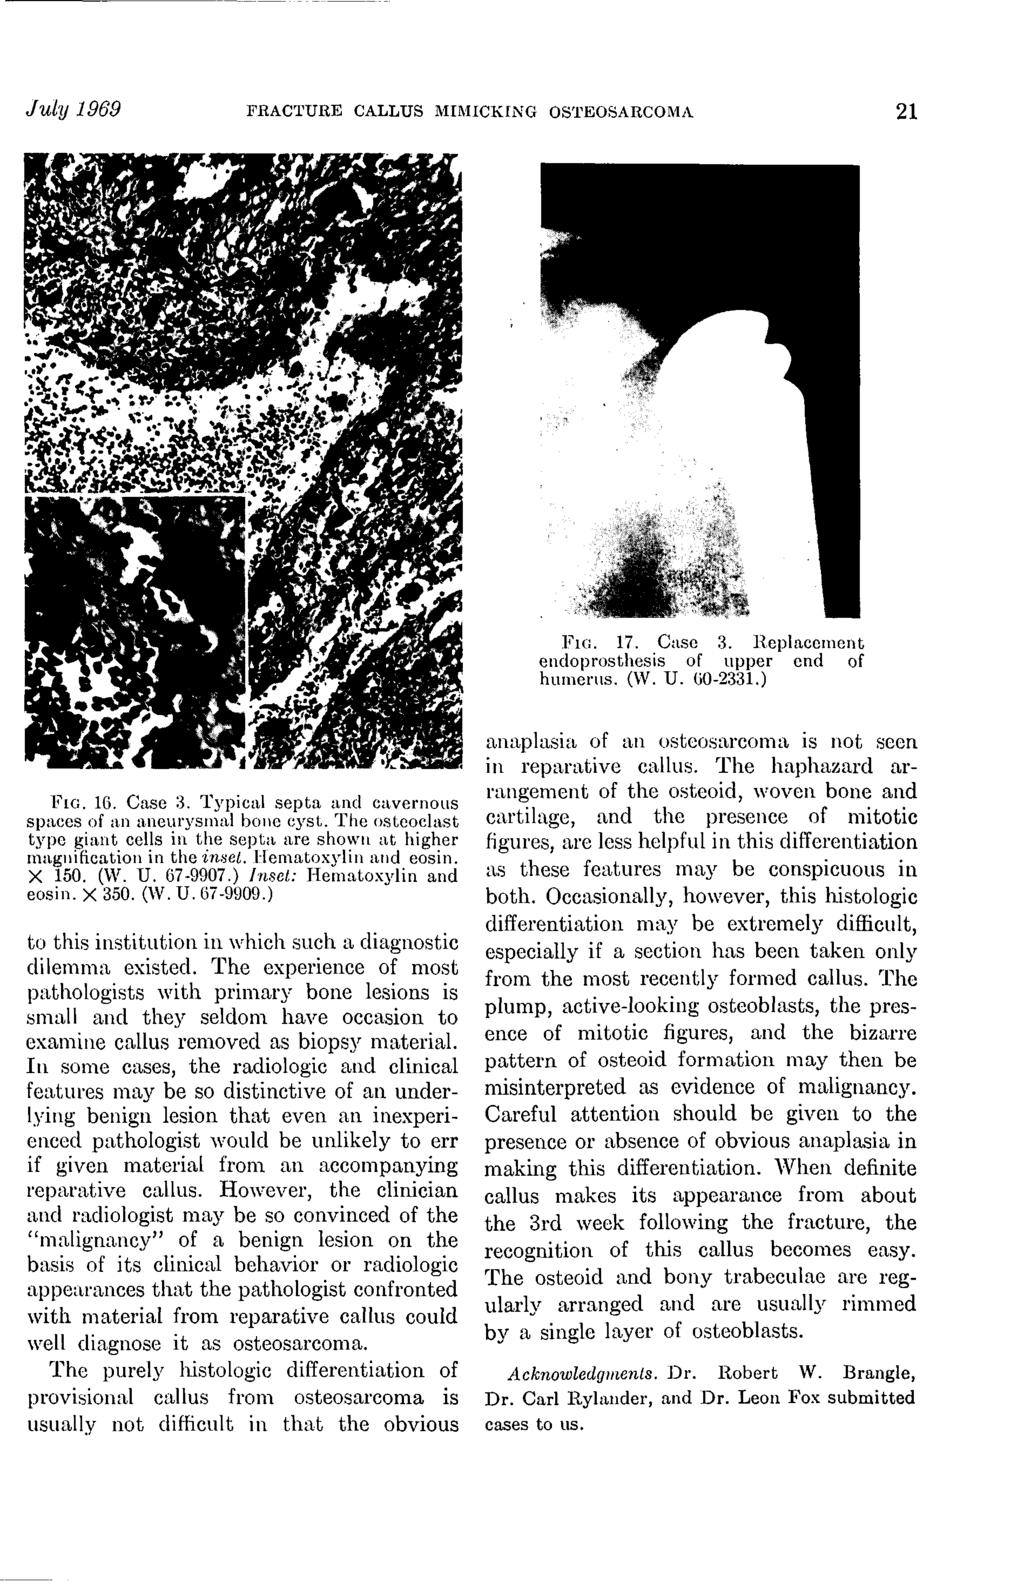 July 1969 FRACTURE CALLUS MIMICKING OSTEOSARCOMA 21 J&-, FIG. 17. Case 3. Replacement endoprosthesis of upper end of humerus. (W. U. 60-2331.) FIG. 16. Case 3. Typical septa and cavernous spaces of an aneurysmal bone cyst.